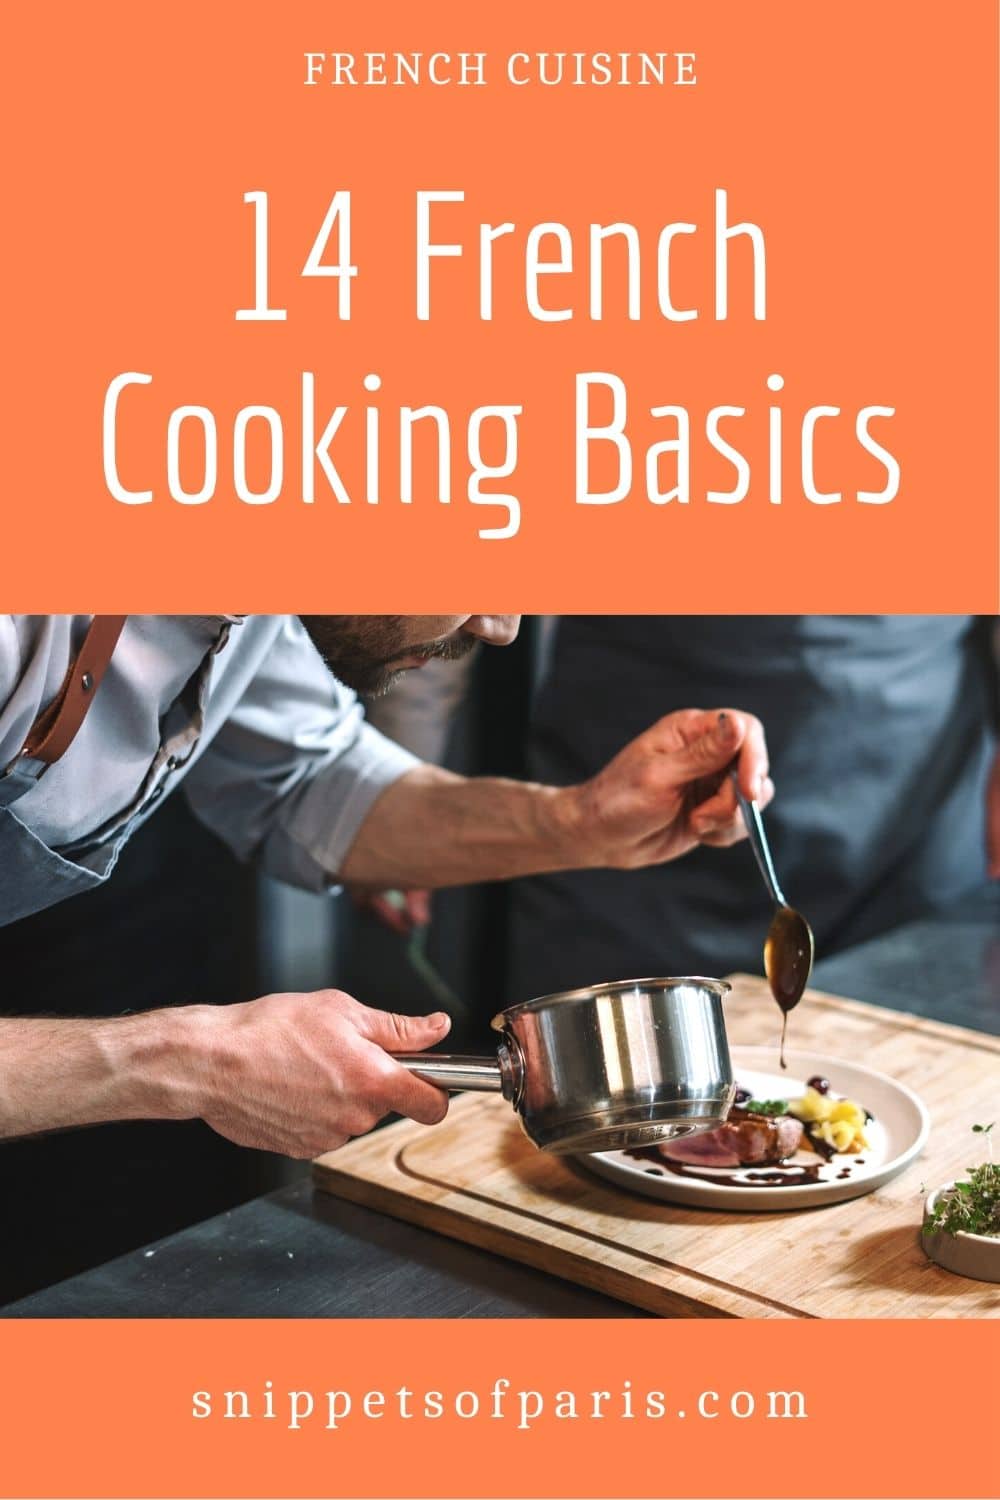 14 French Cooking Basics every aspiring chef should know